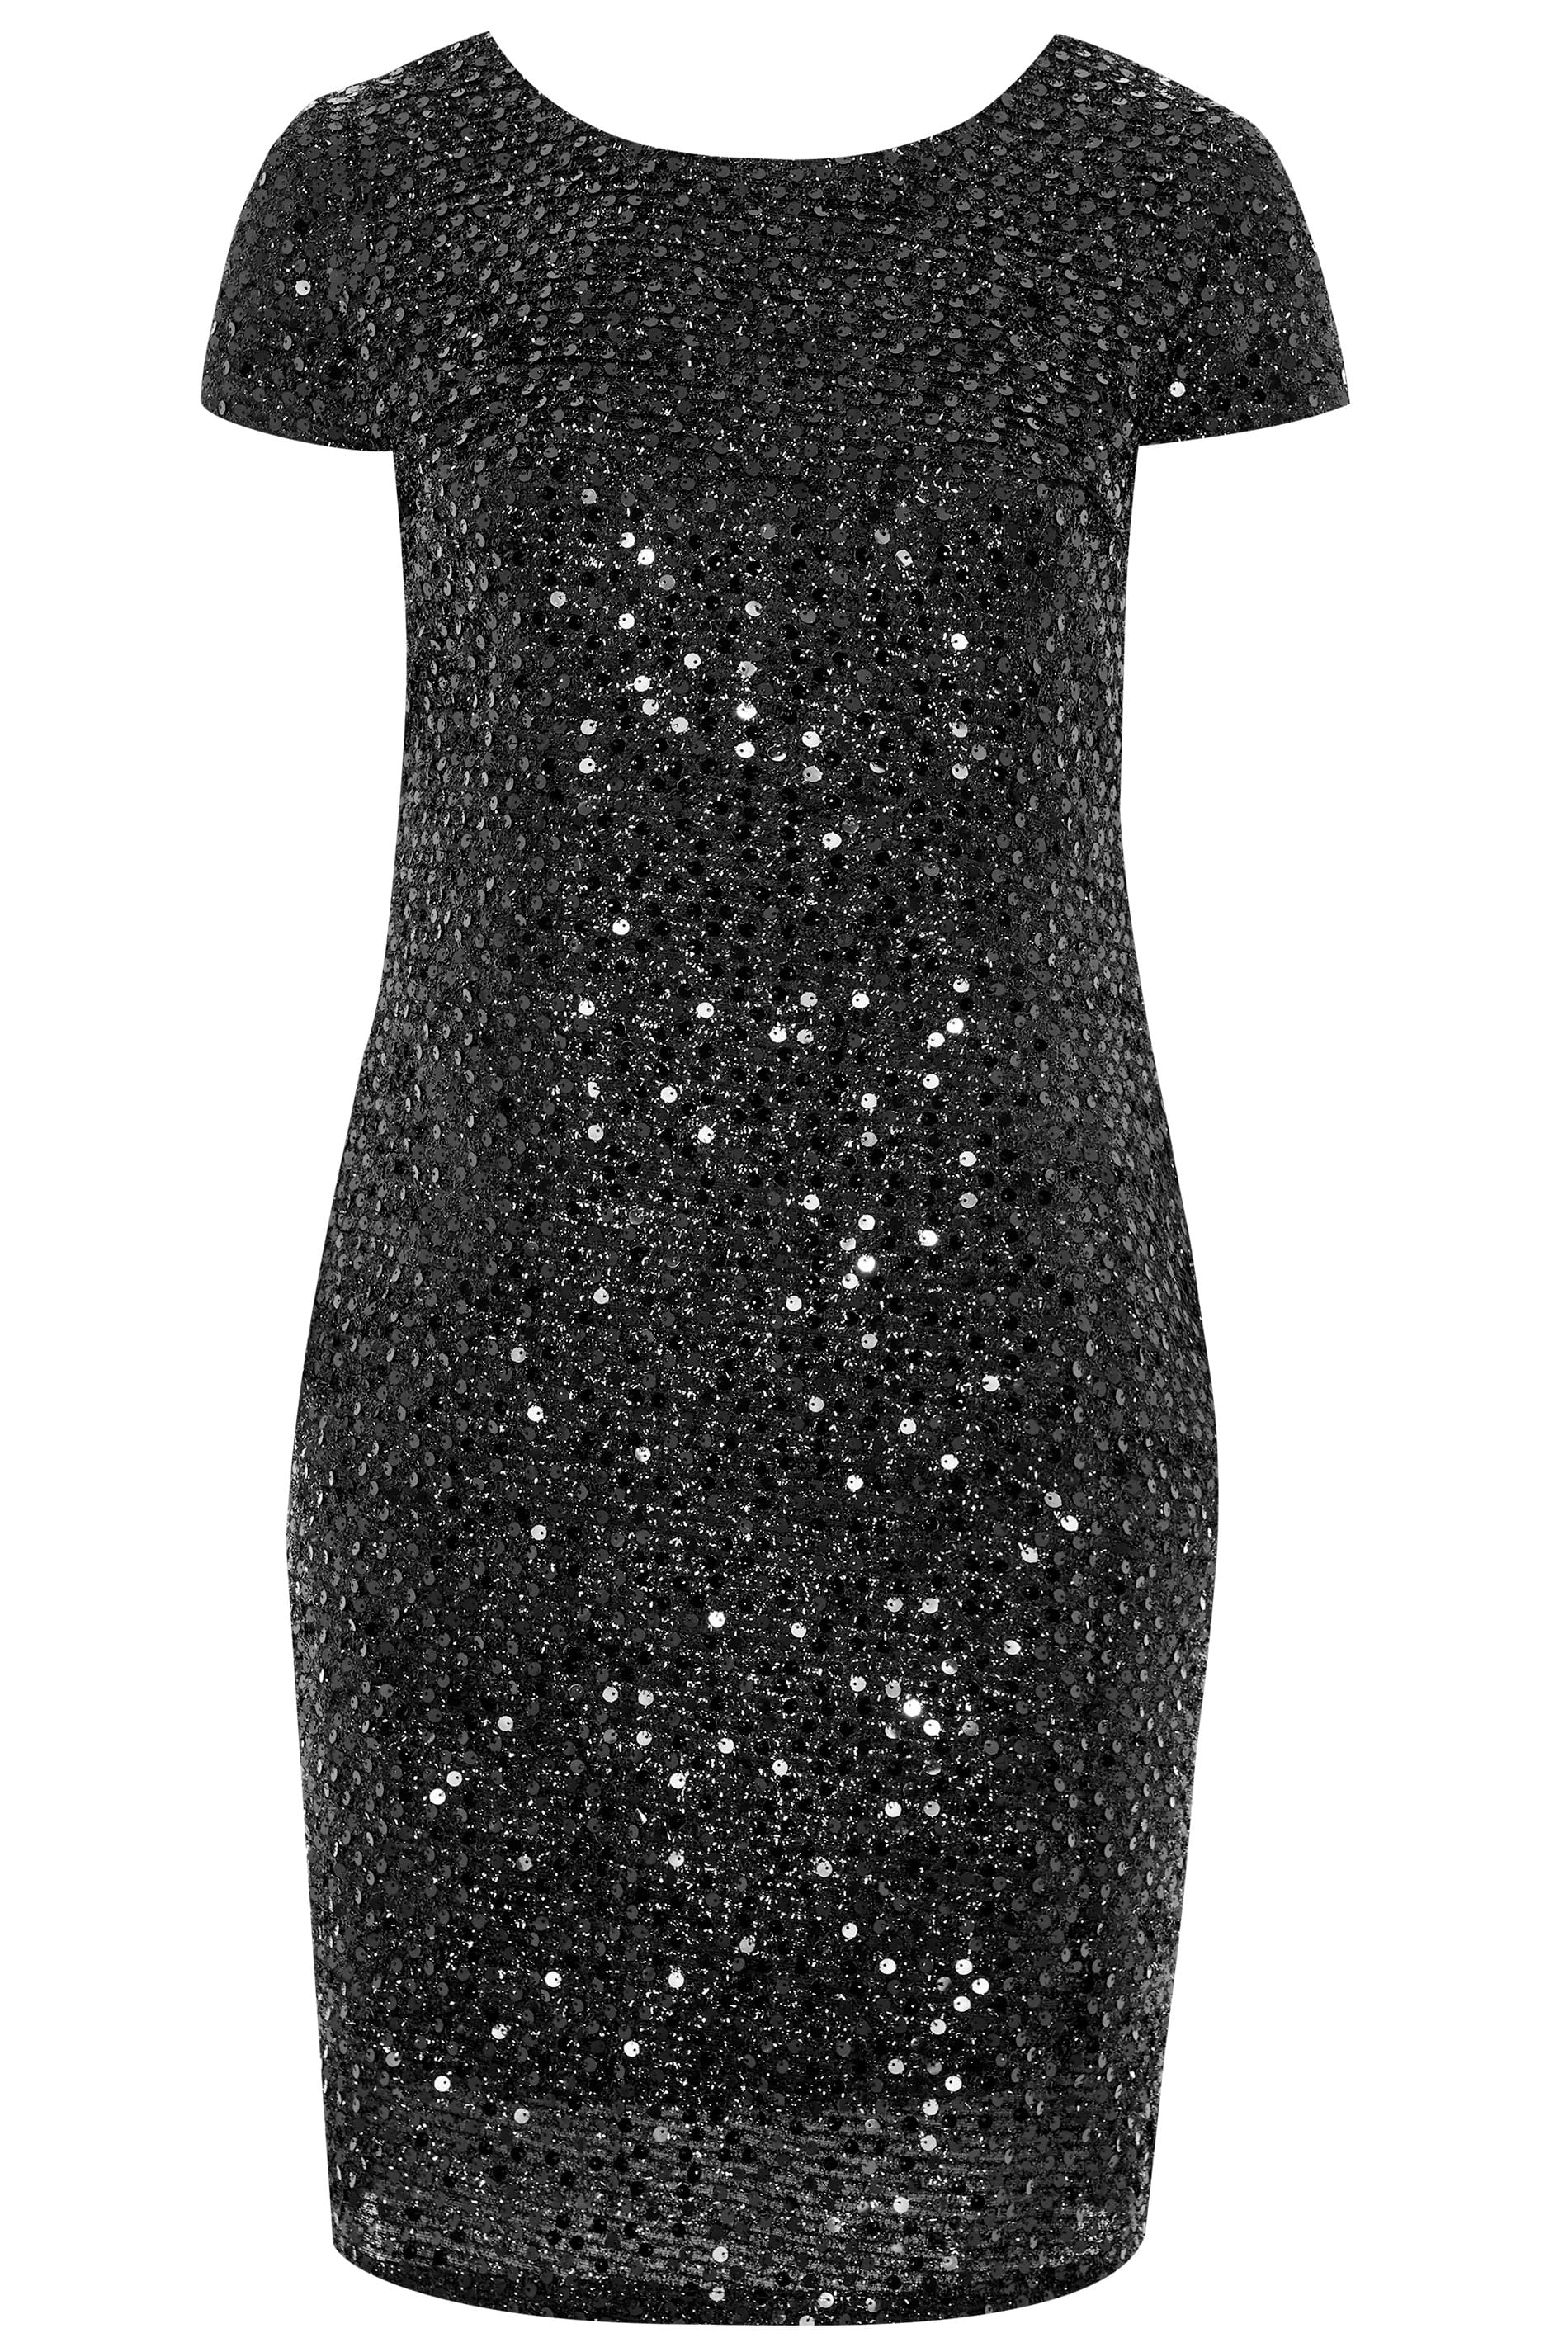 YOURS LONDON Black Tinsel & Sequin Embellished Shift Dress | Yours Clothing